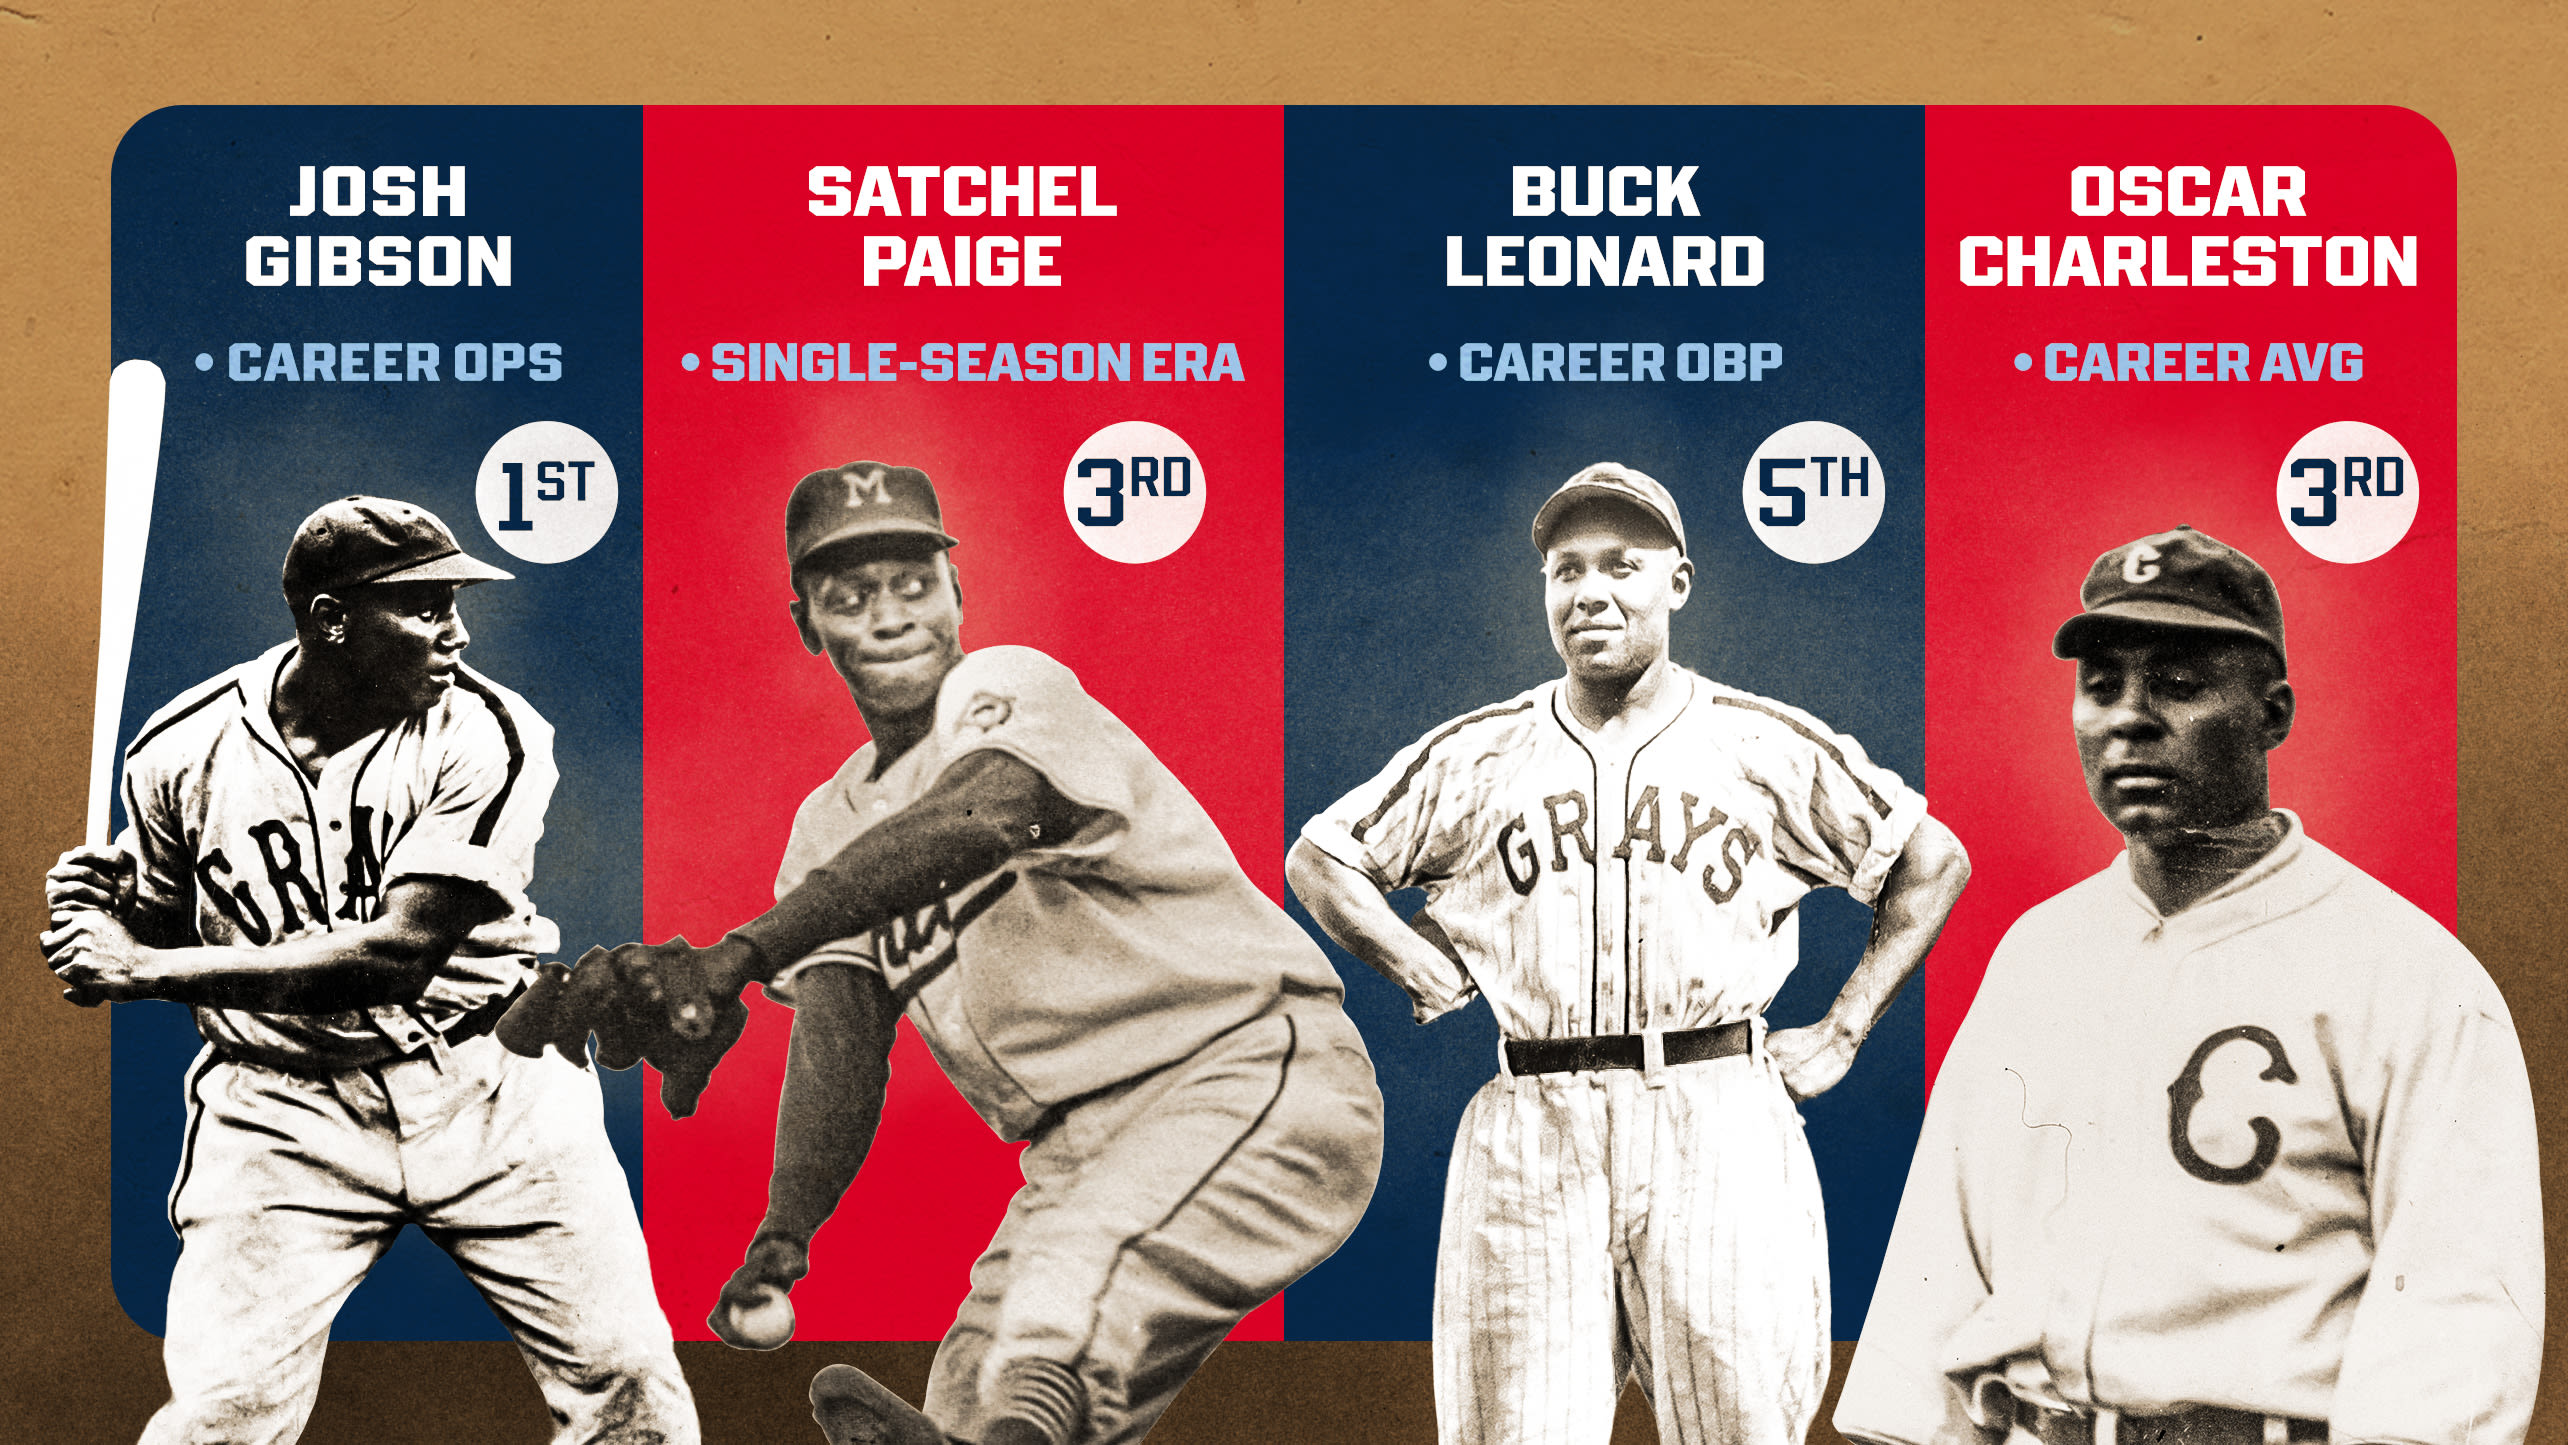 Top leaderboard changes as Negro Leagues join Major League record